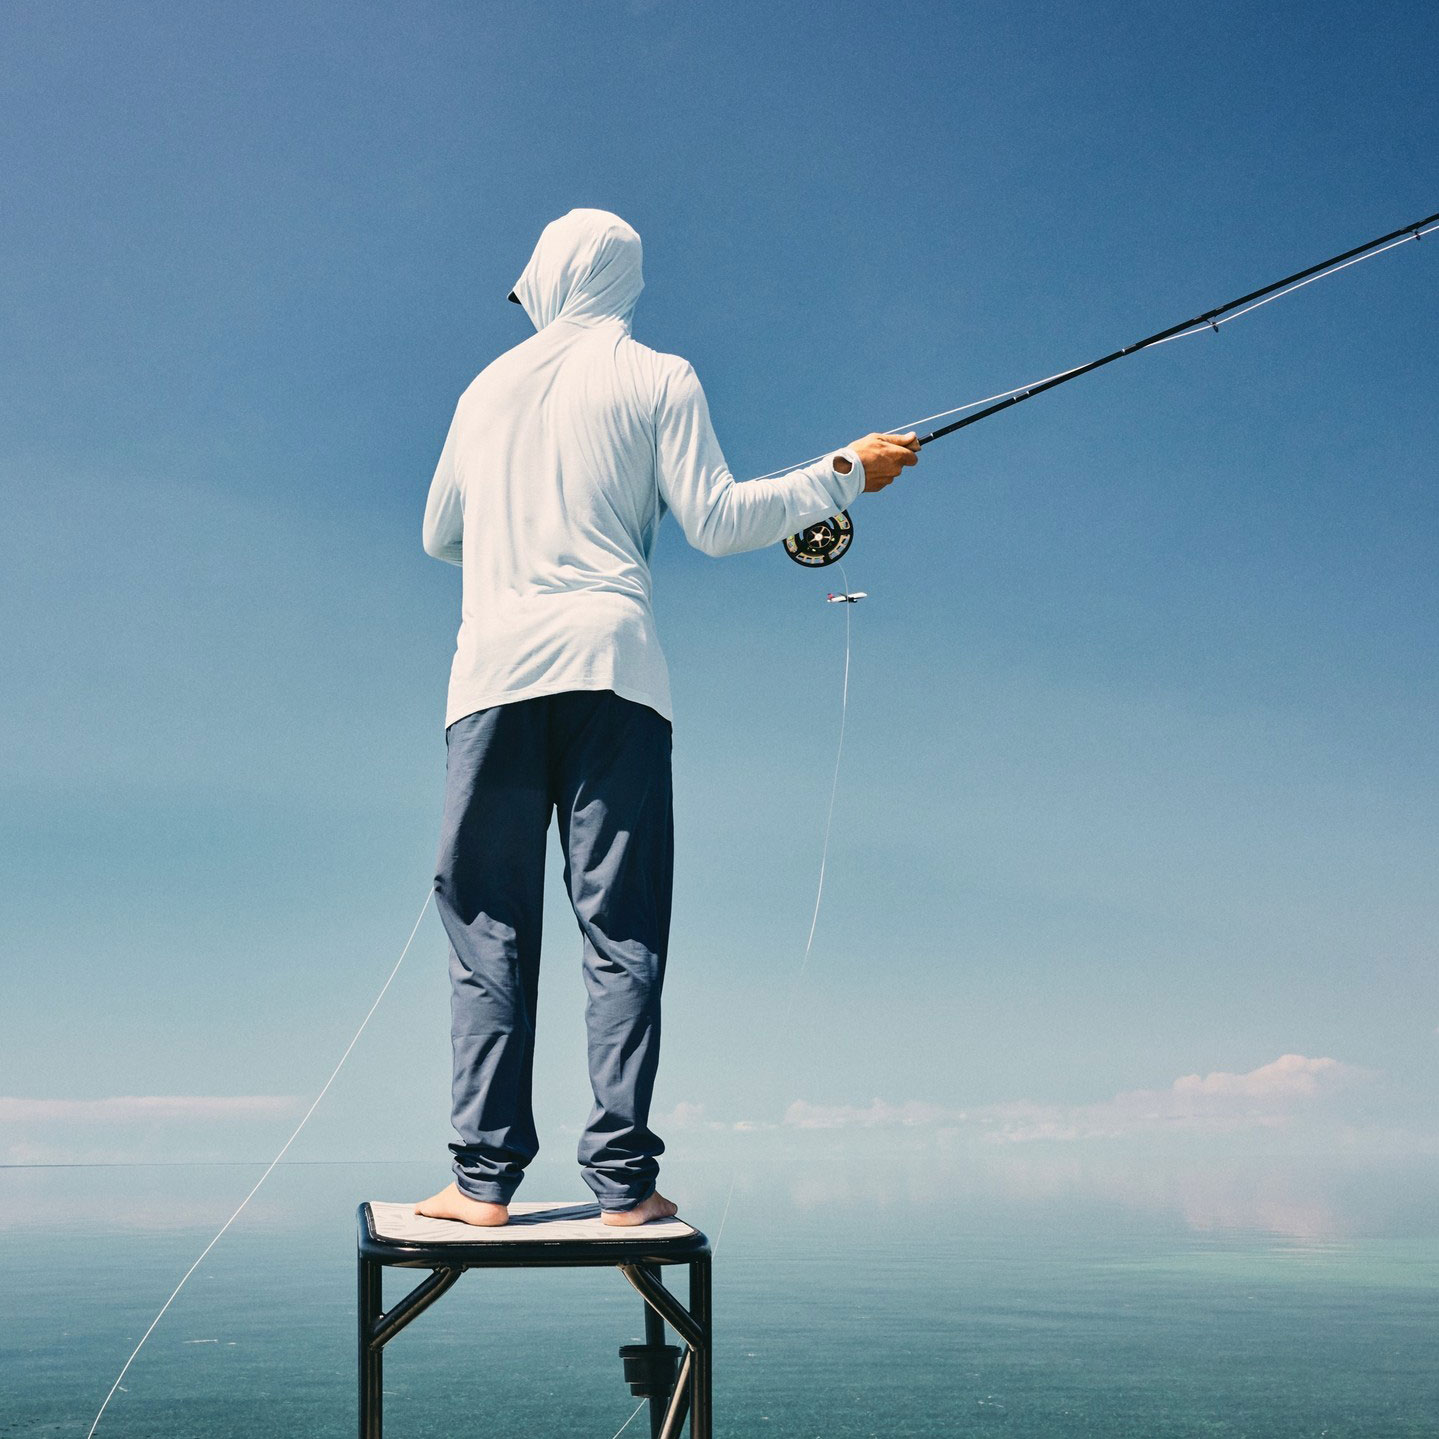 FreeFly Apparel image - person standing on fishing boat platform casting rod